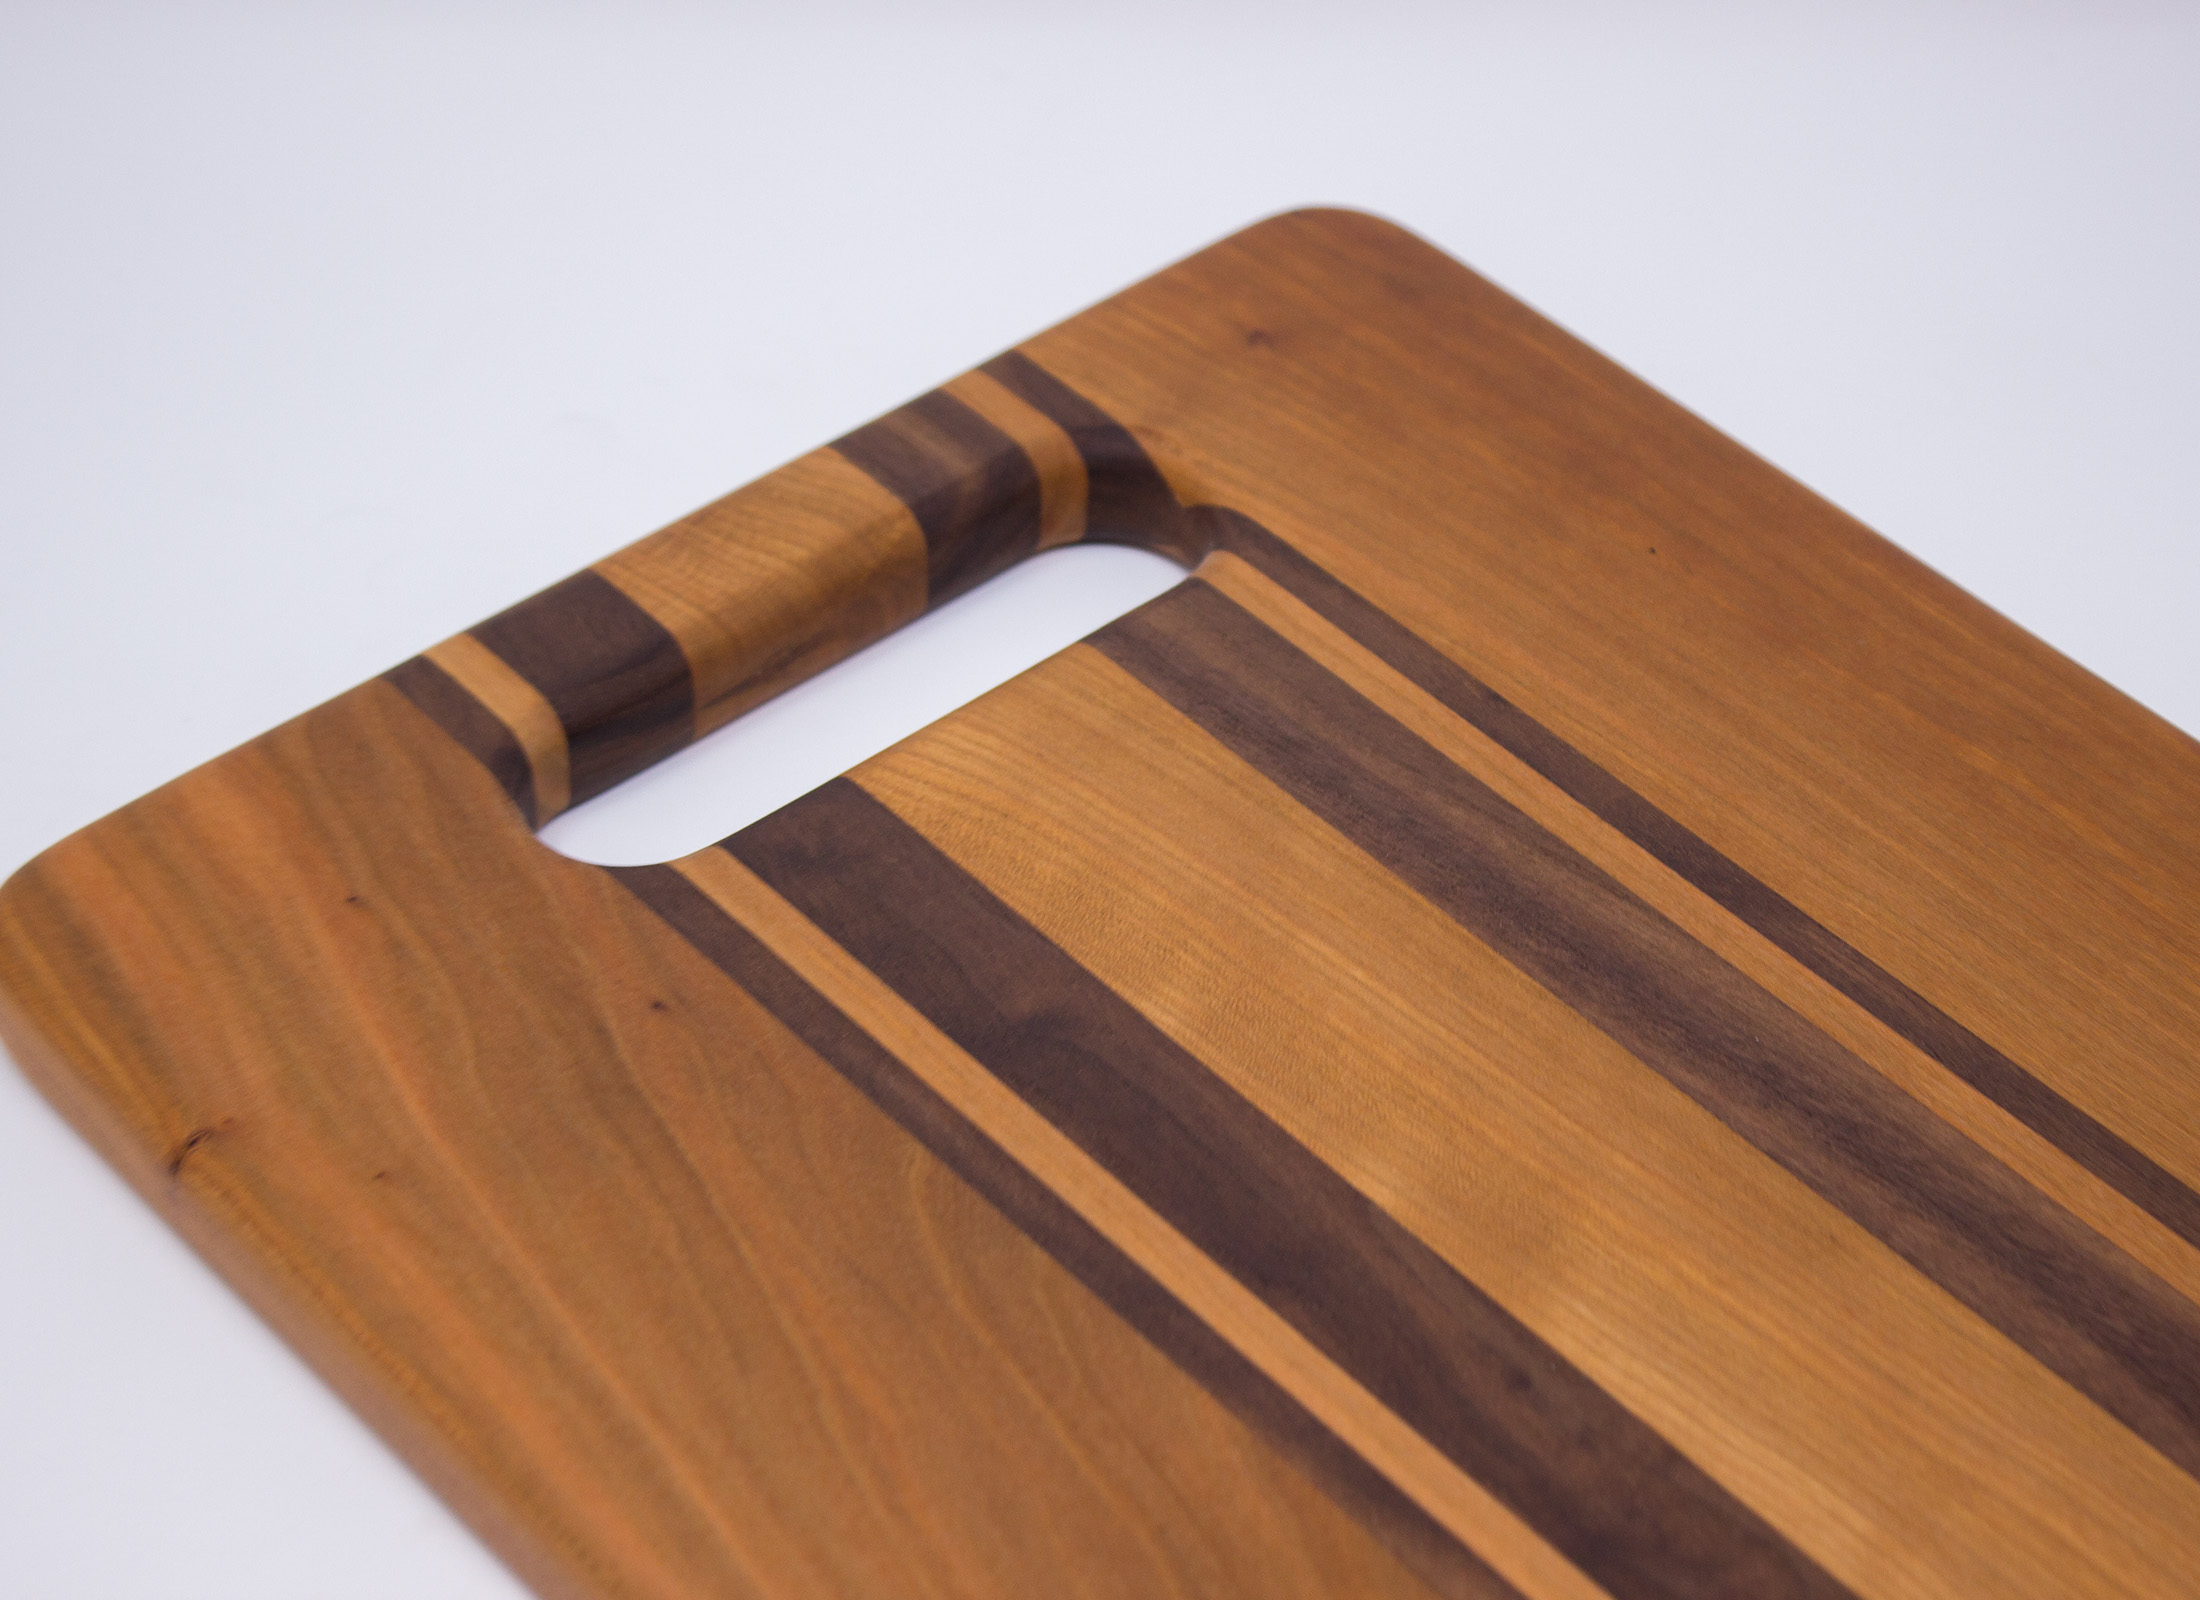 metal handles for cutting boards - Wood for You